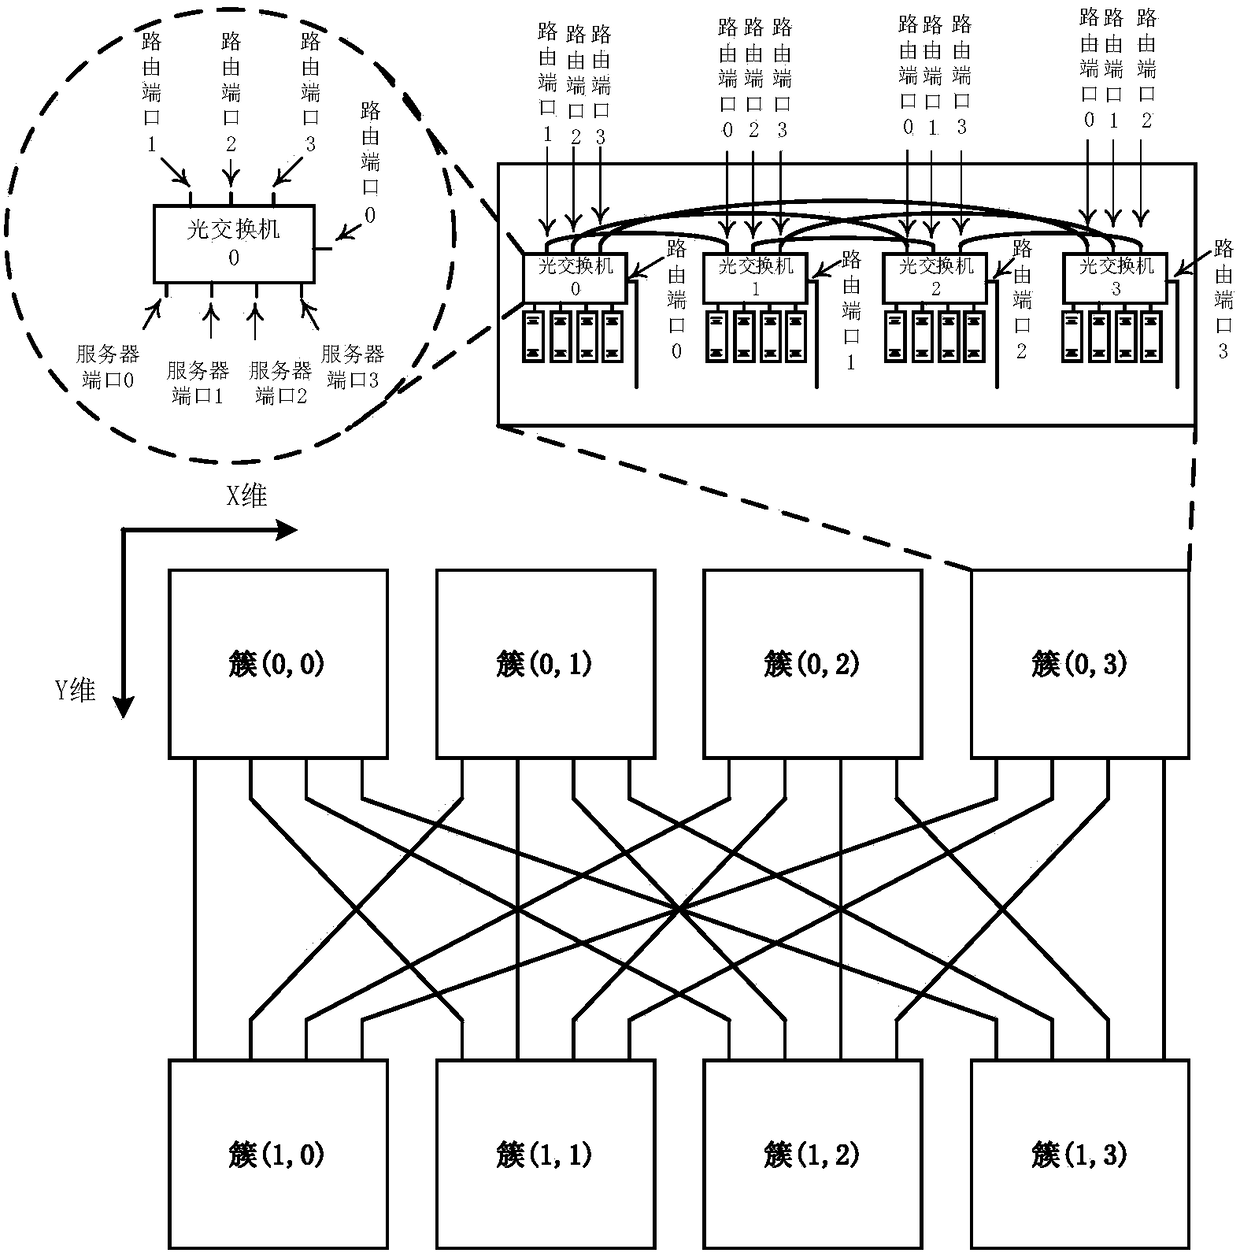 A highly scalable data center all-optical interconnection network system and communication method